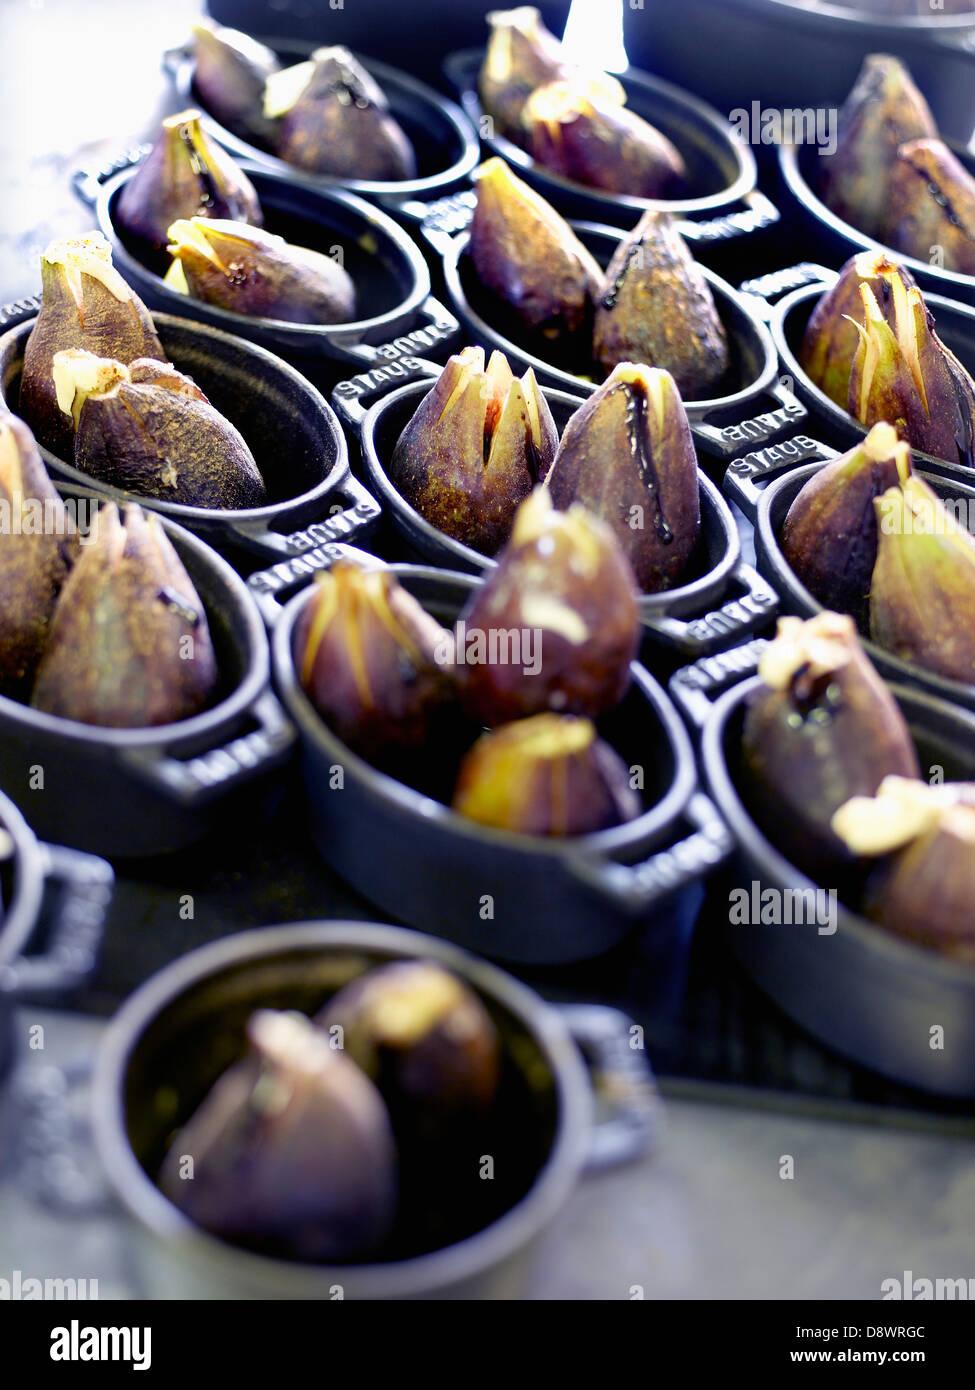 Baked chestnuts in small casserole dishes Stock Photo